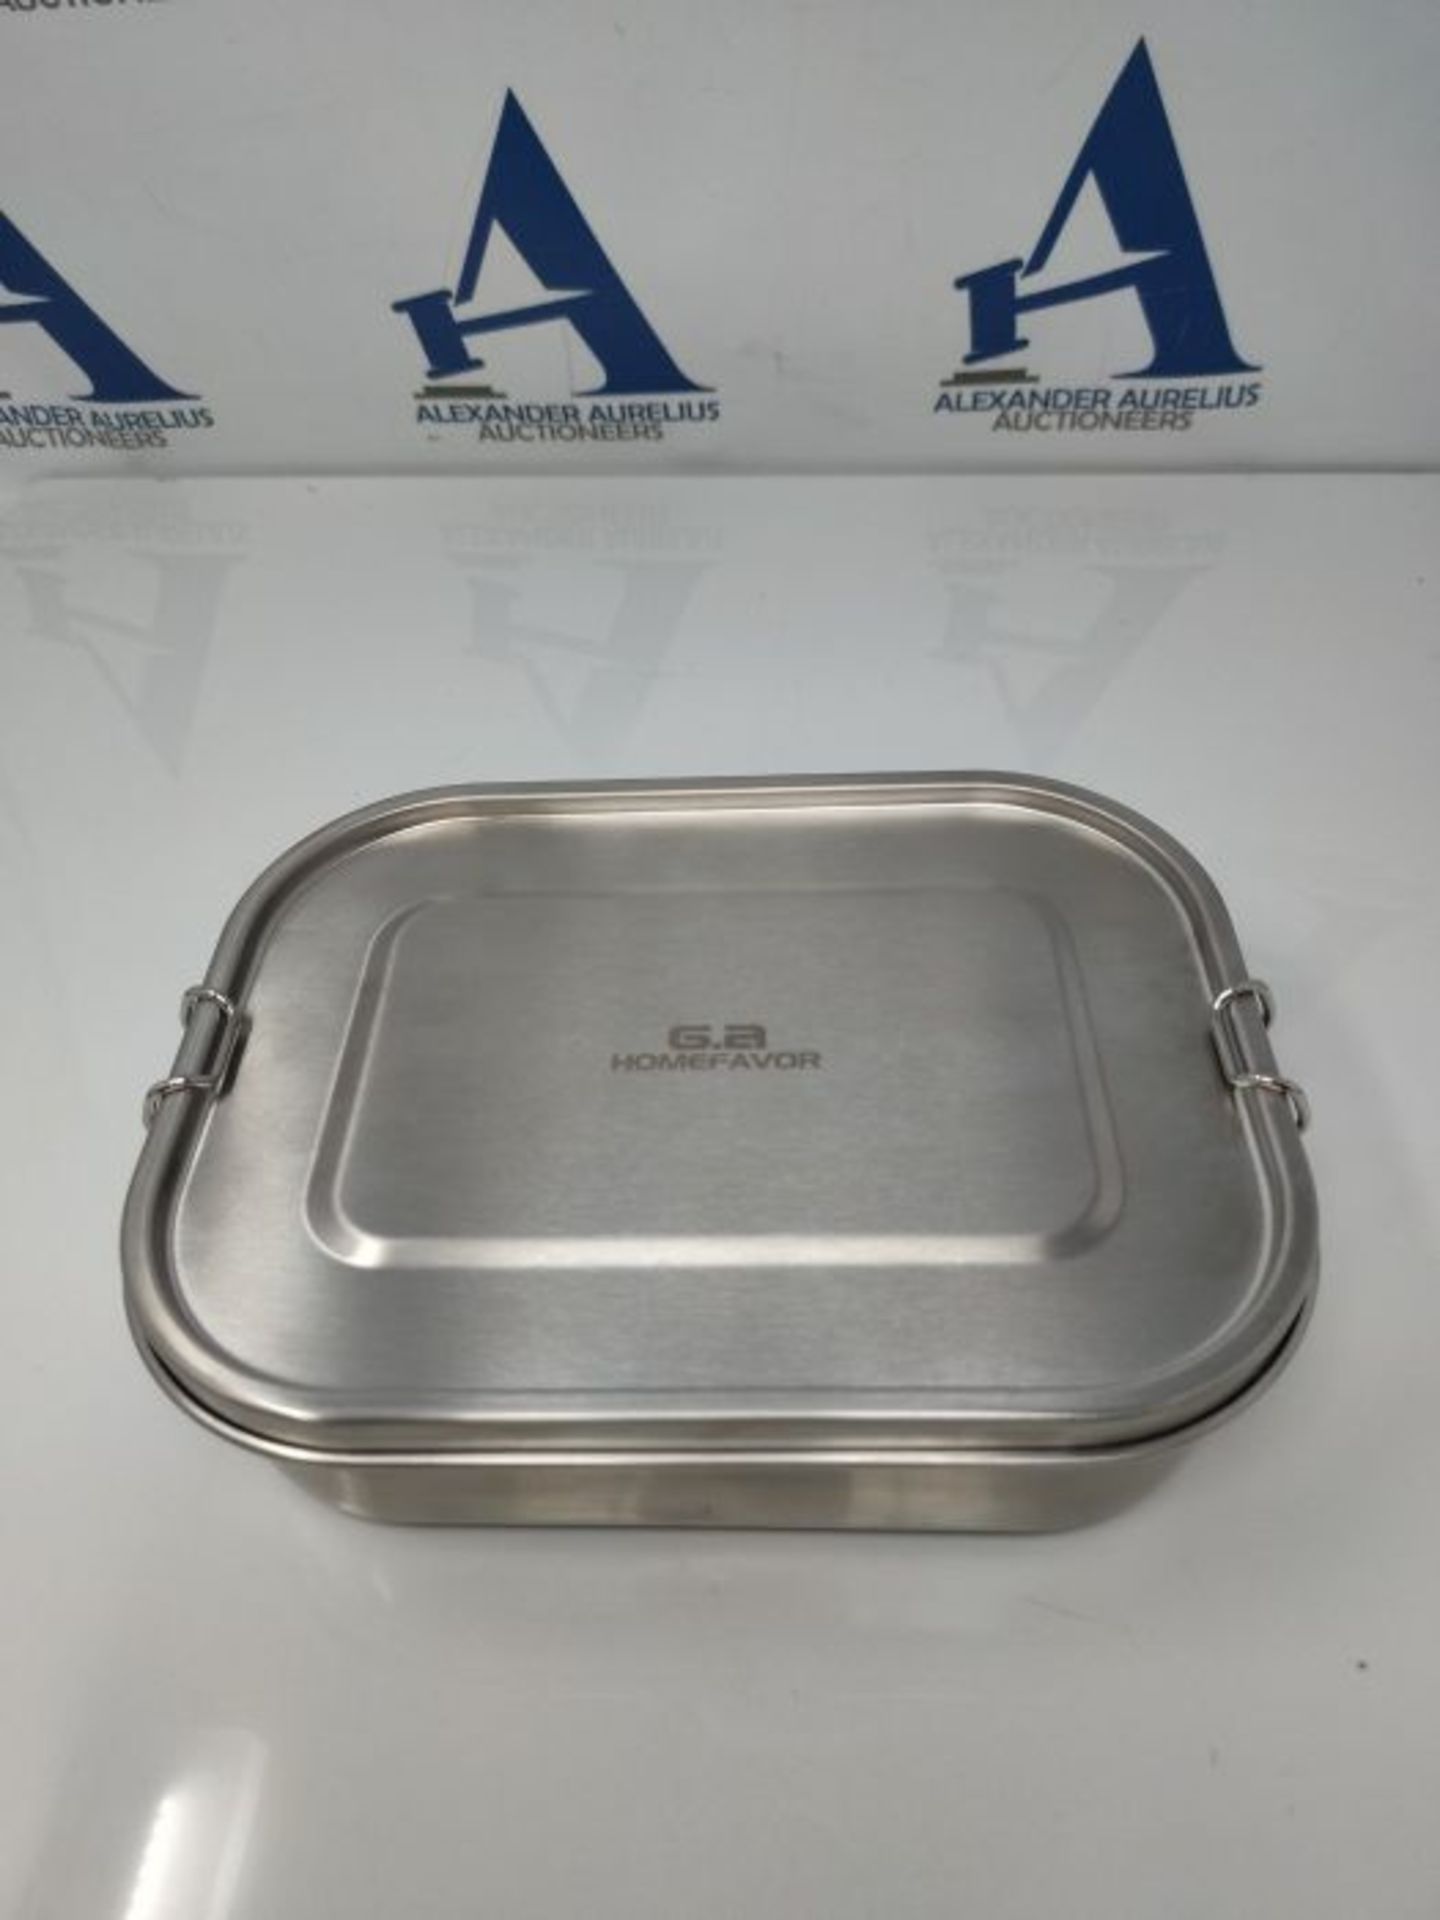 G.a HOMEFAVOR 1400ML Stainless Steel Lunch Box Bento Box, Leakproof Metal Lunch Box Sa - Image 3 of 3